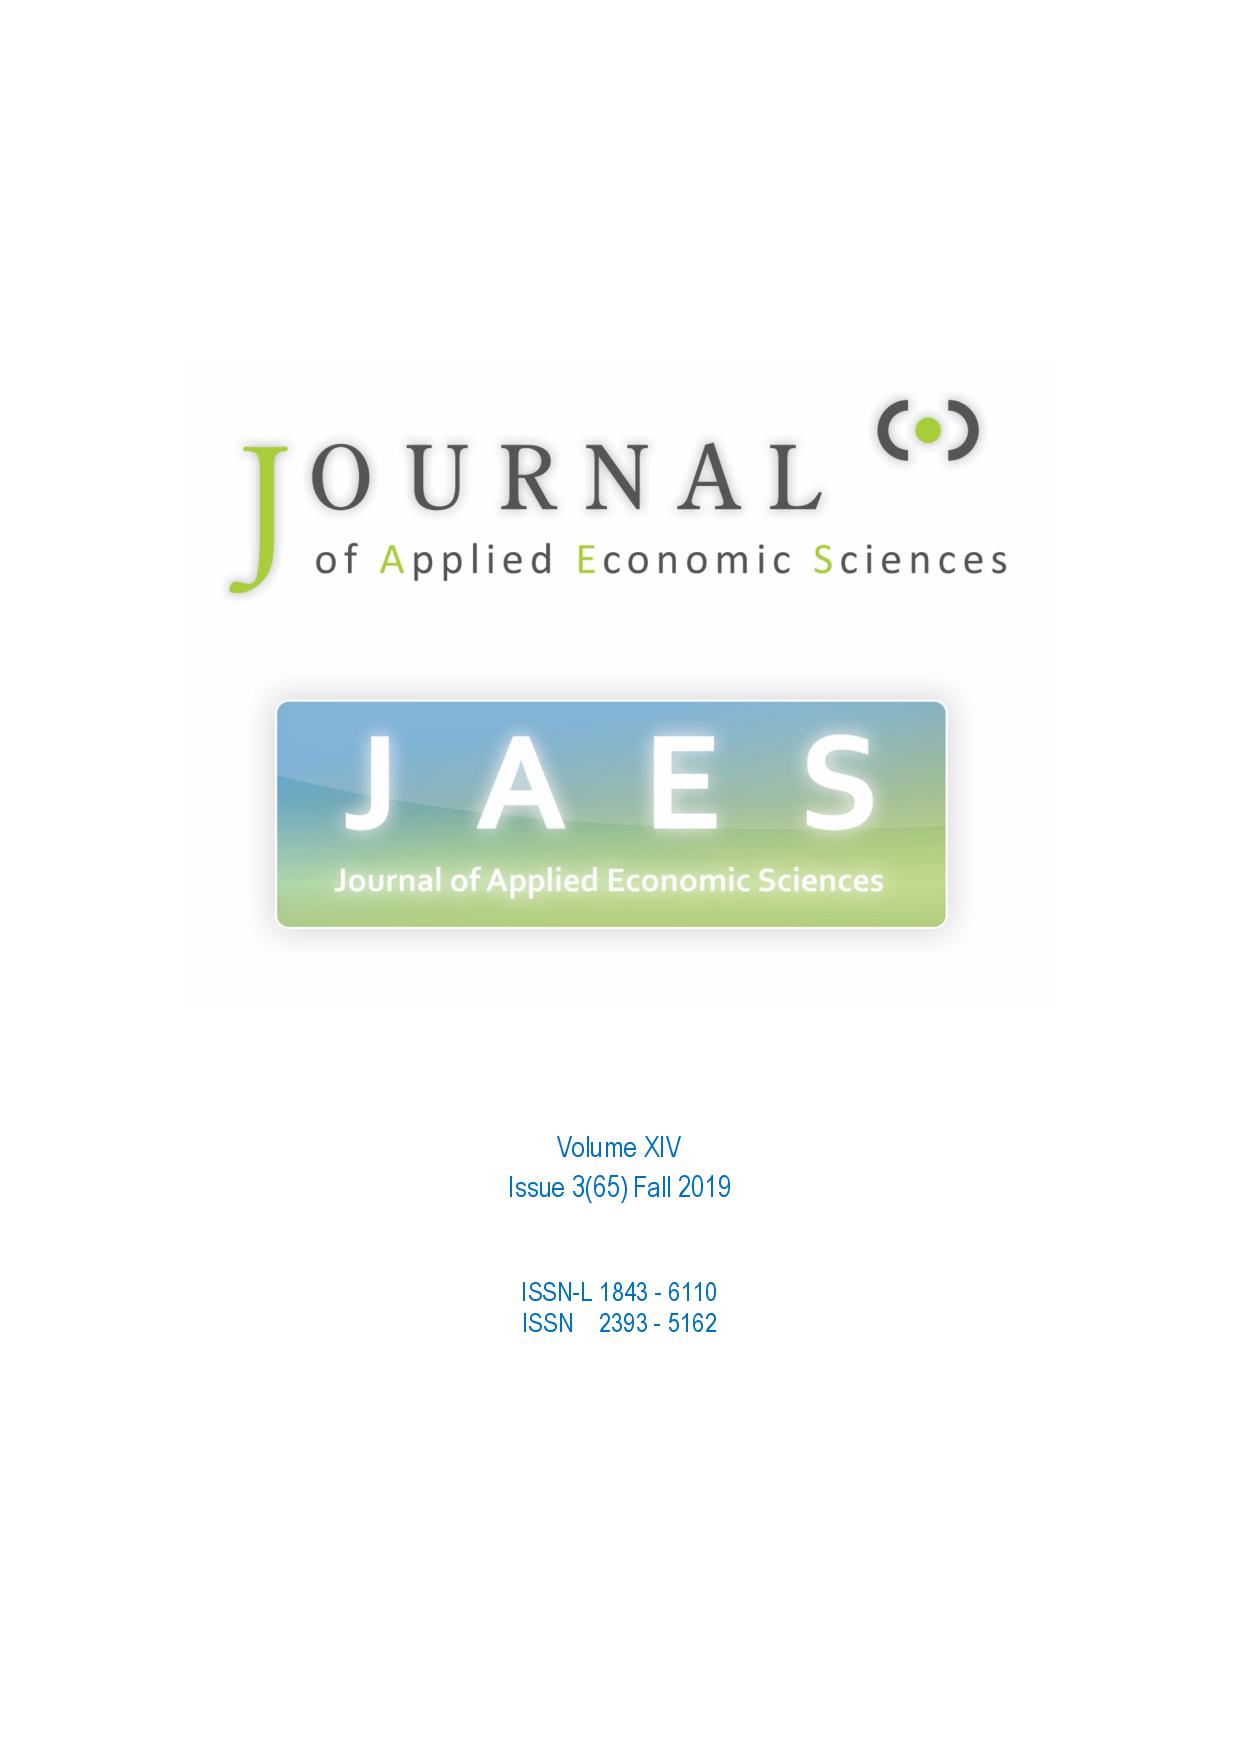 Analysis of the Impact of Regional Expenditure on Human Development: A Study of Jambi Province, Indonesia Cover Image